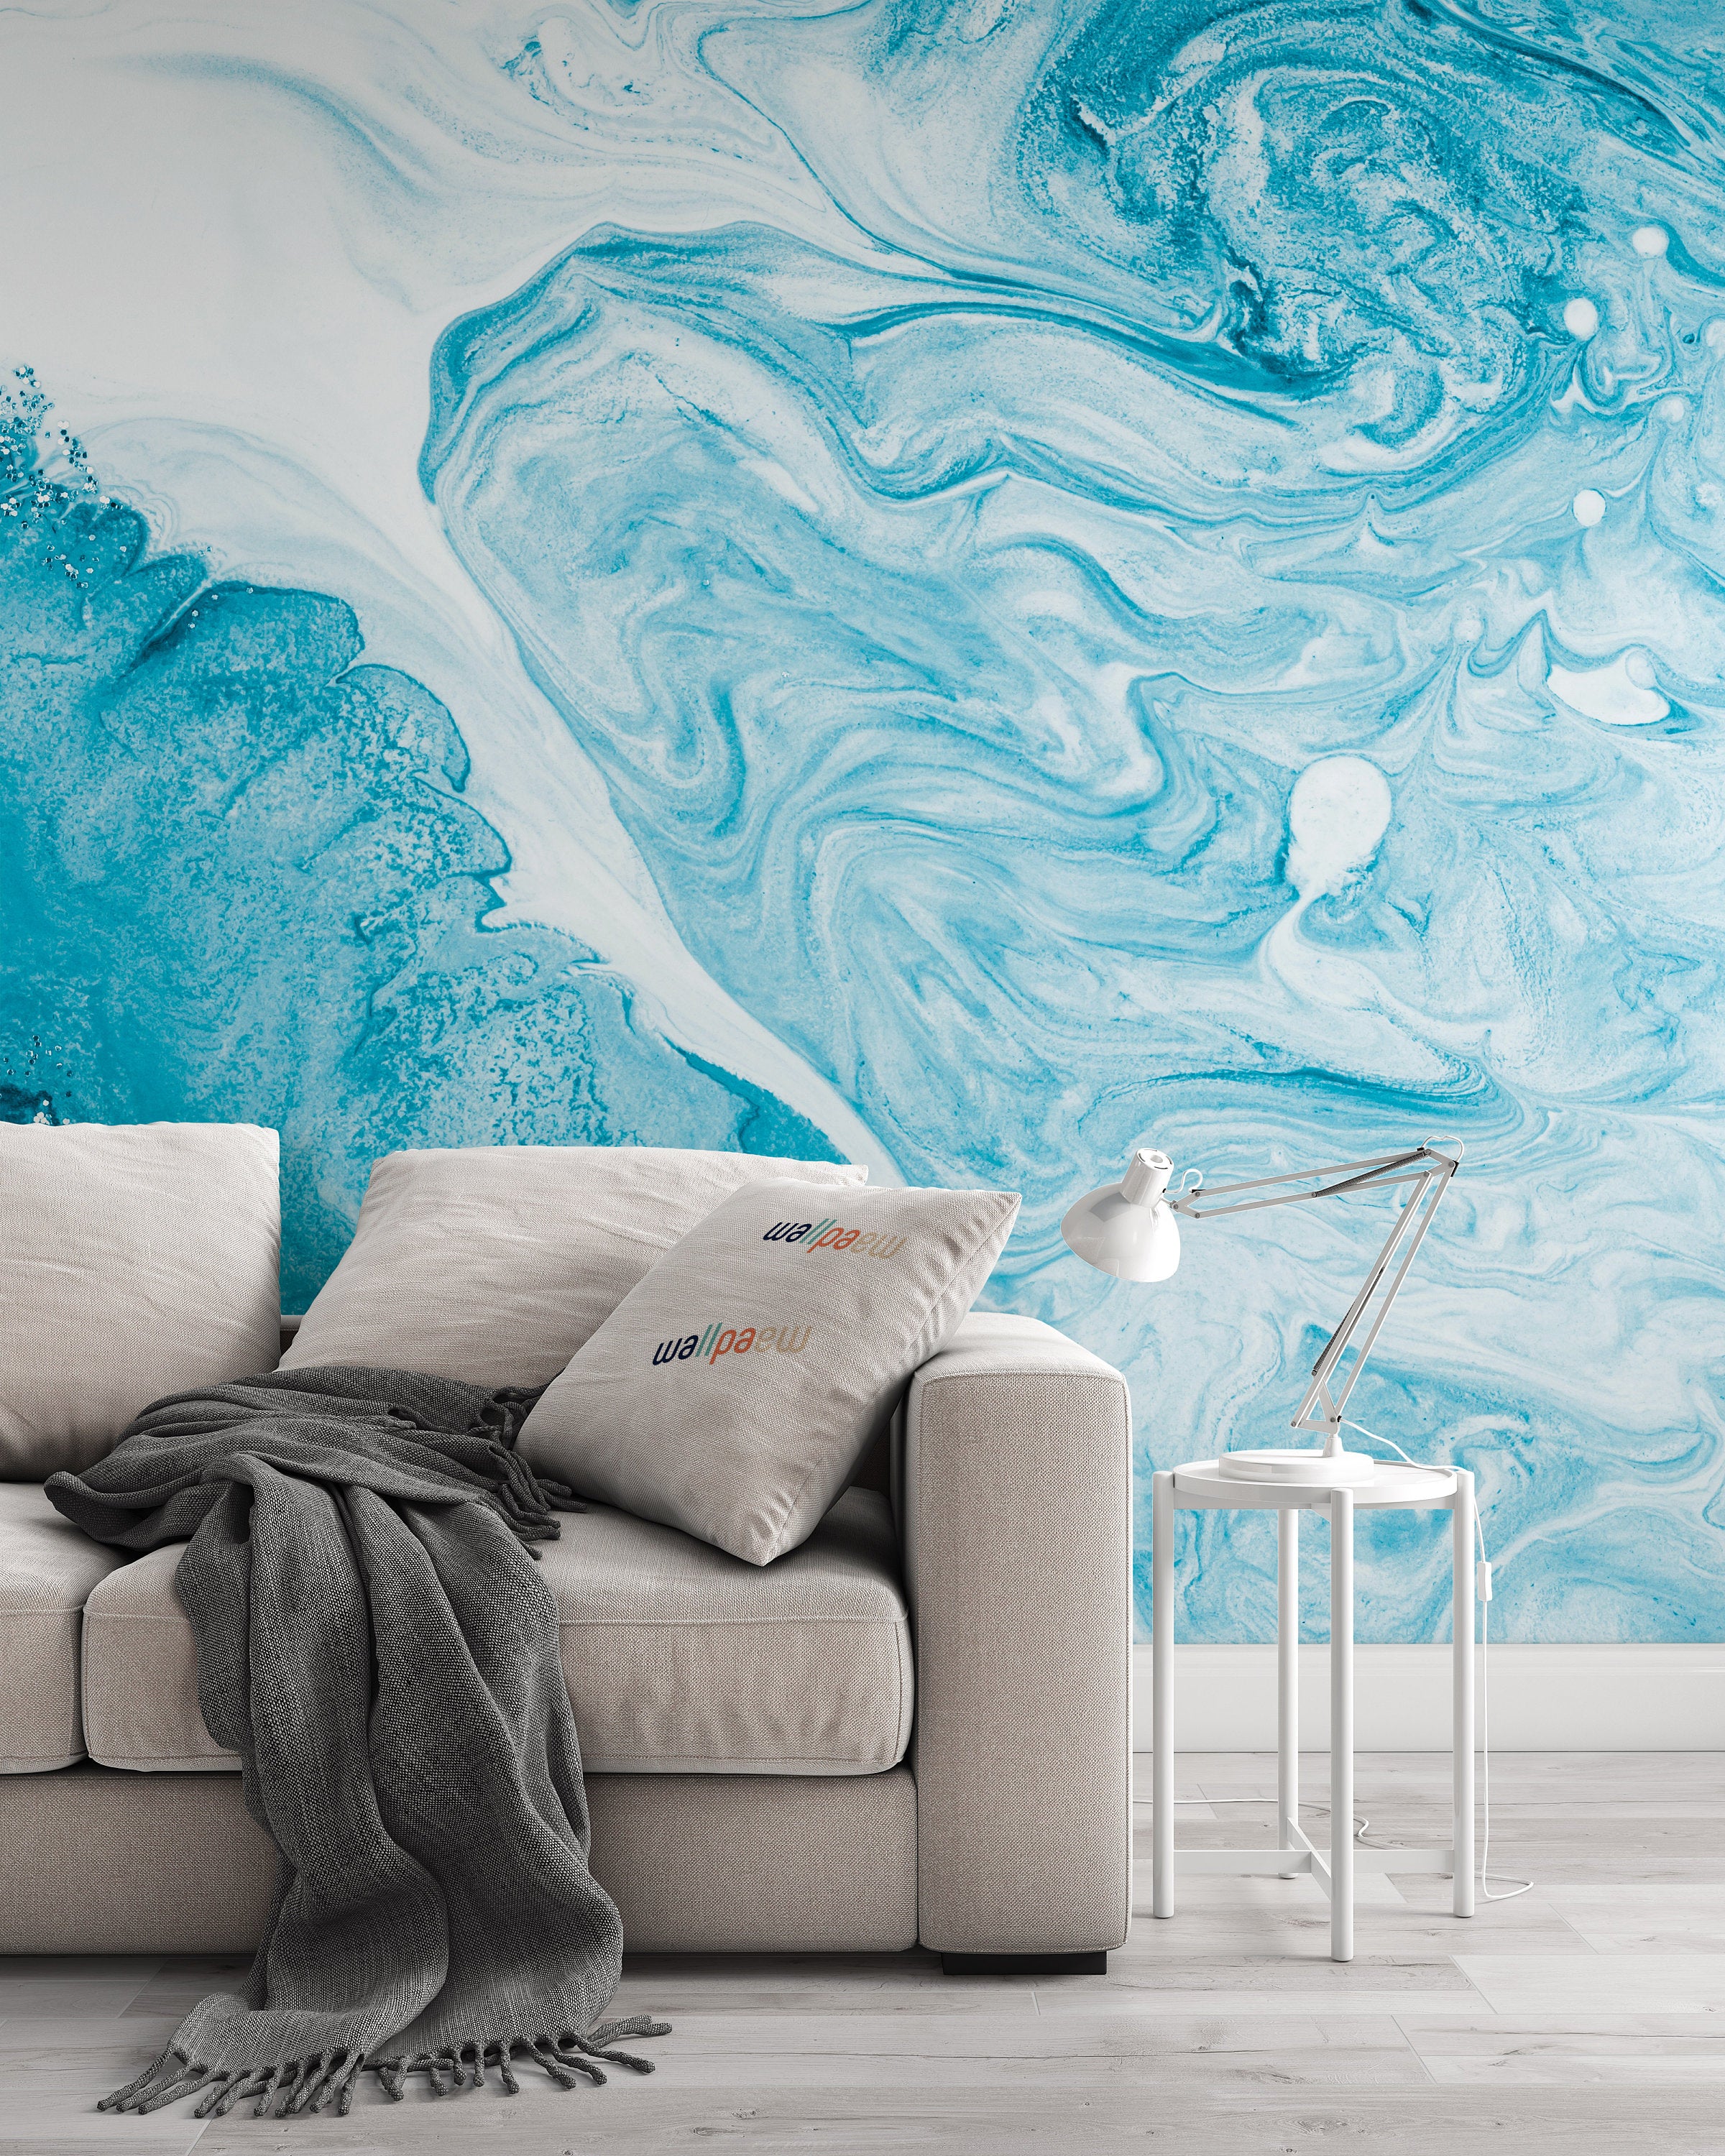 Blue Silver Abstract Ocean Hand Painted Marble Texture Wallpaper Cafe Restaurant Decoration Living Room Bedroom Mural Home Decor Wall Art